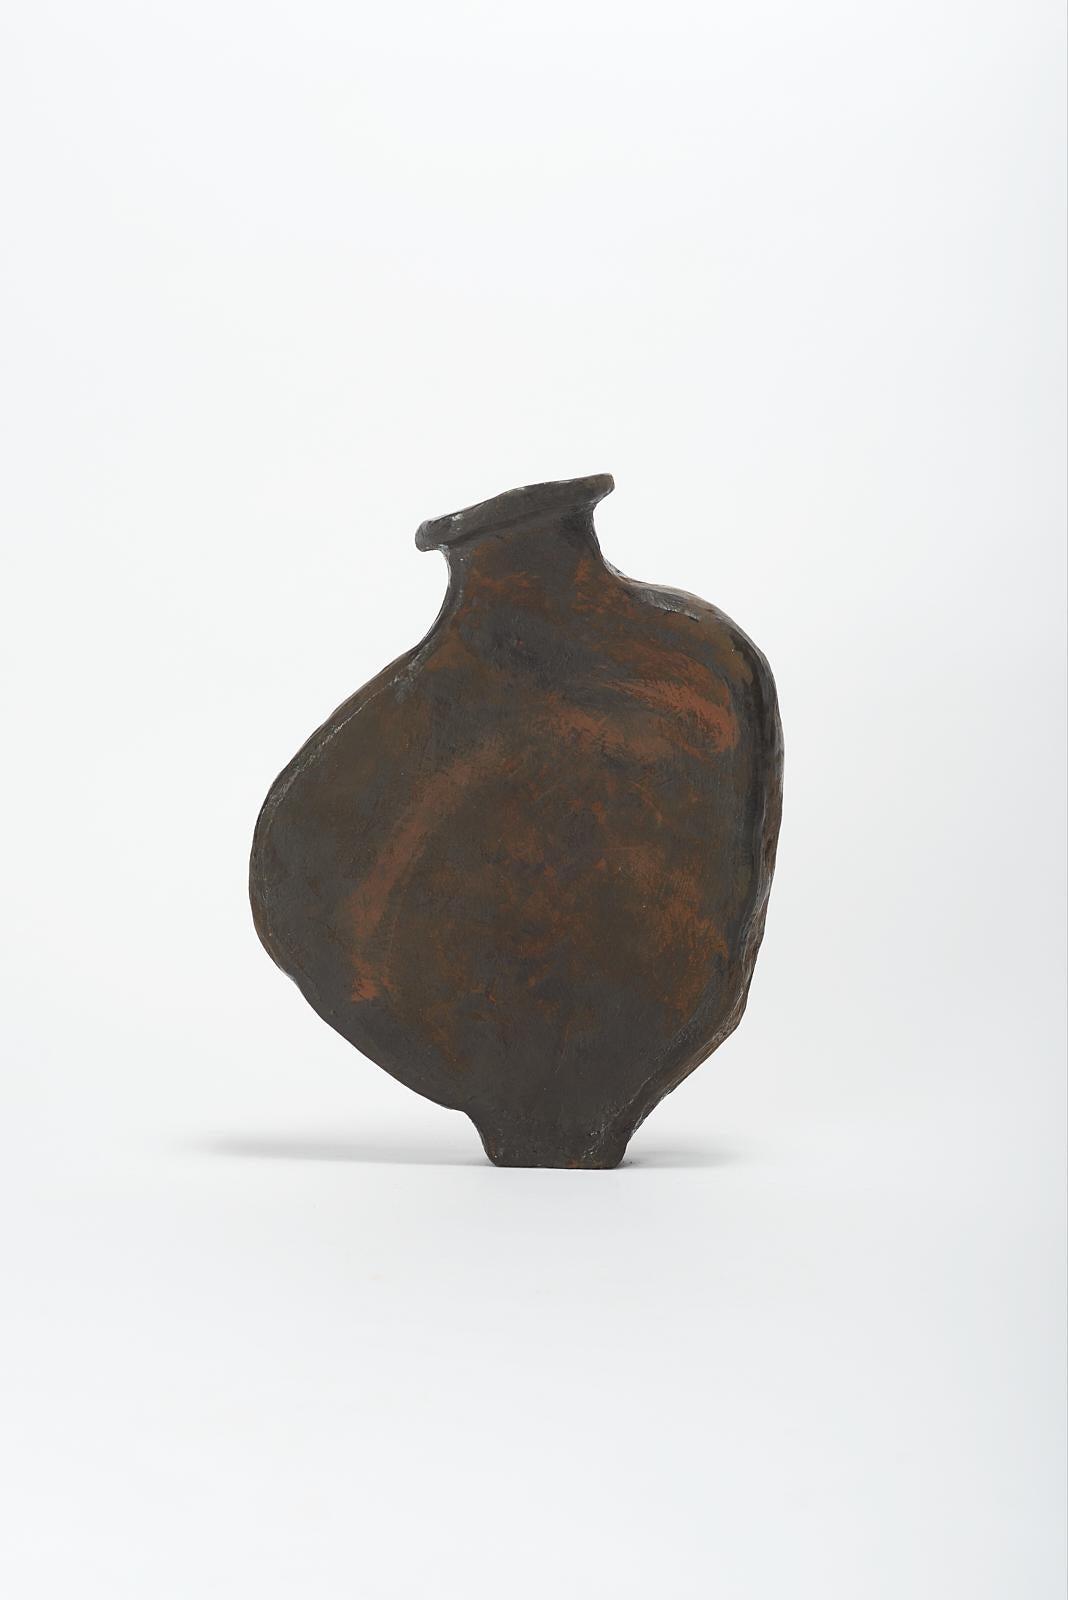 Tumbo Vase by Willem Van Hooff
Core Vessel Series
Dimensions: W 26 x D 10 x H 36 cm (Dimensions may vary as pieces are hand-made and might present slight variations in sizes)
Materials: Earthenware, ceramic, pigments, glaze.

Core is a series of